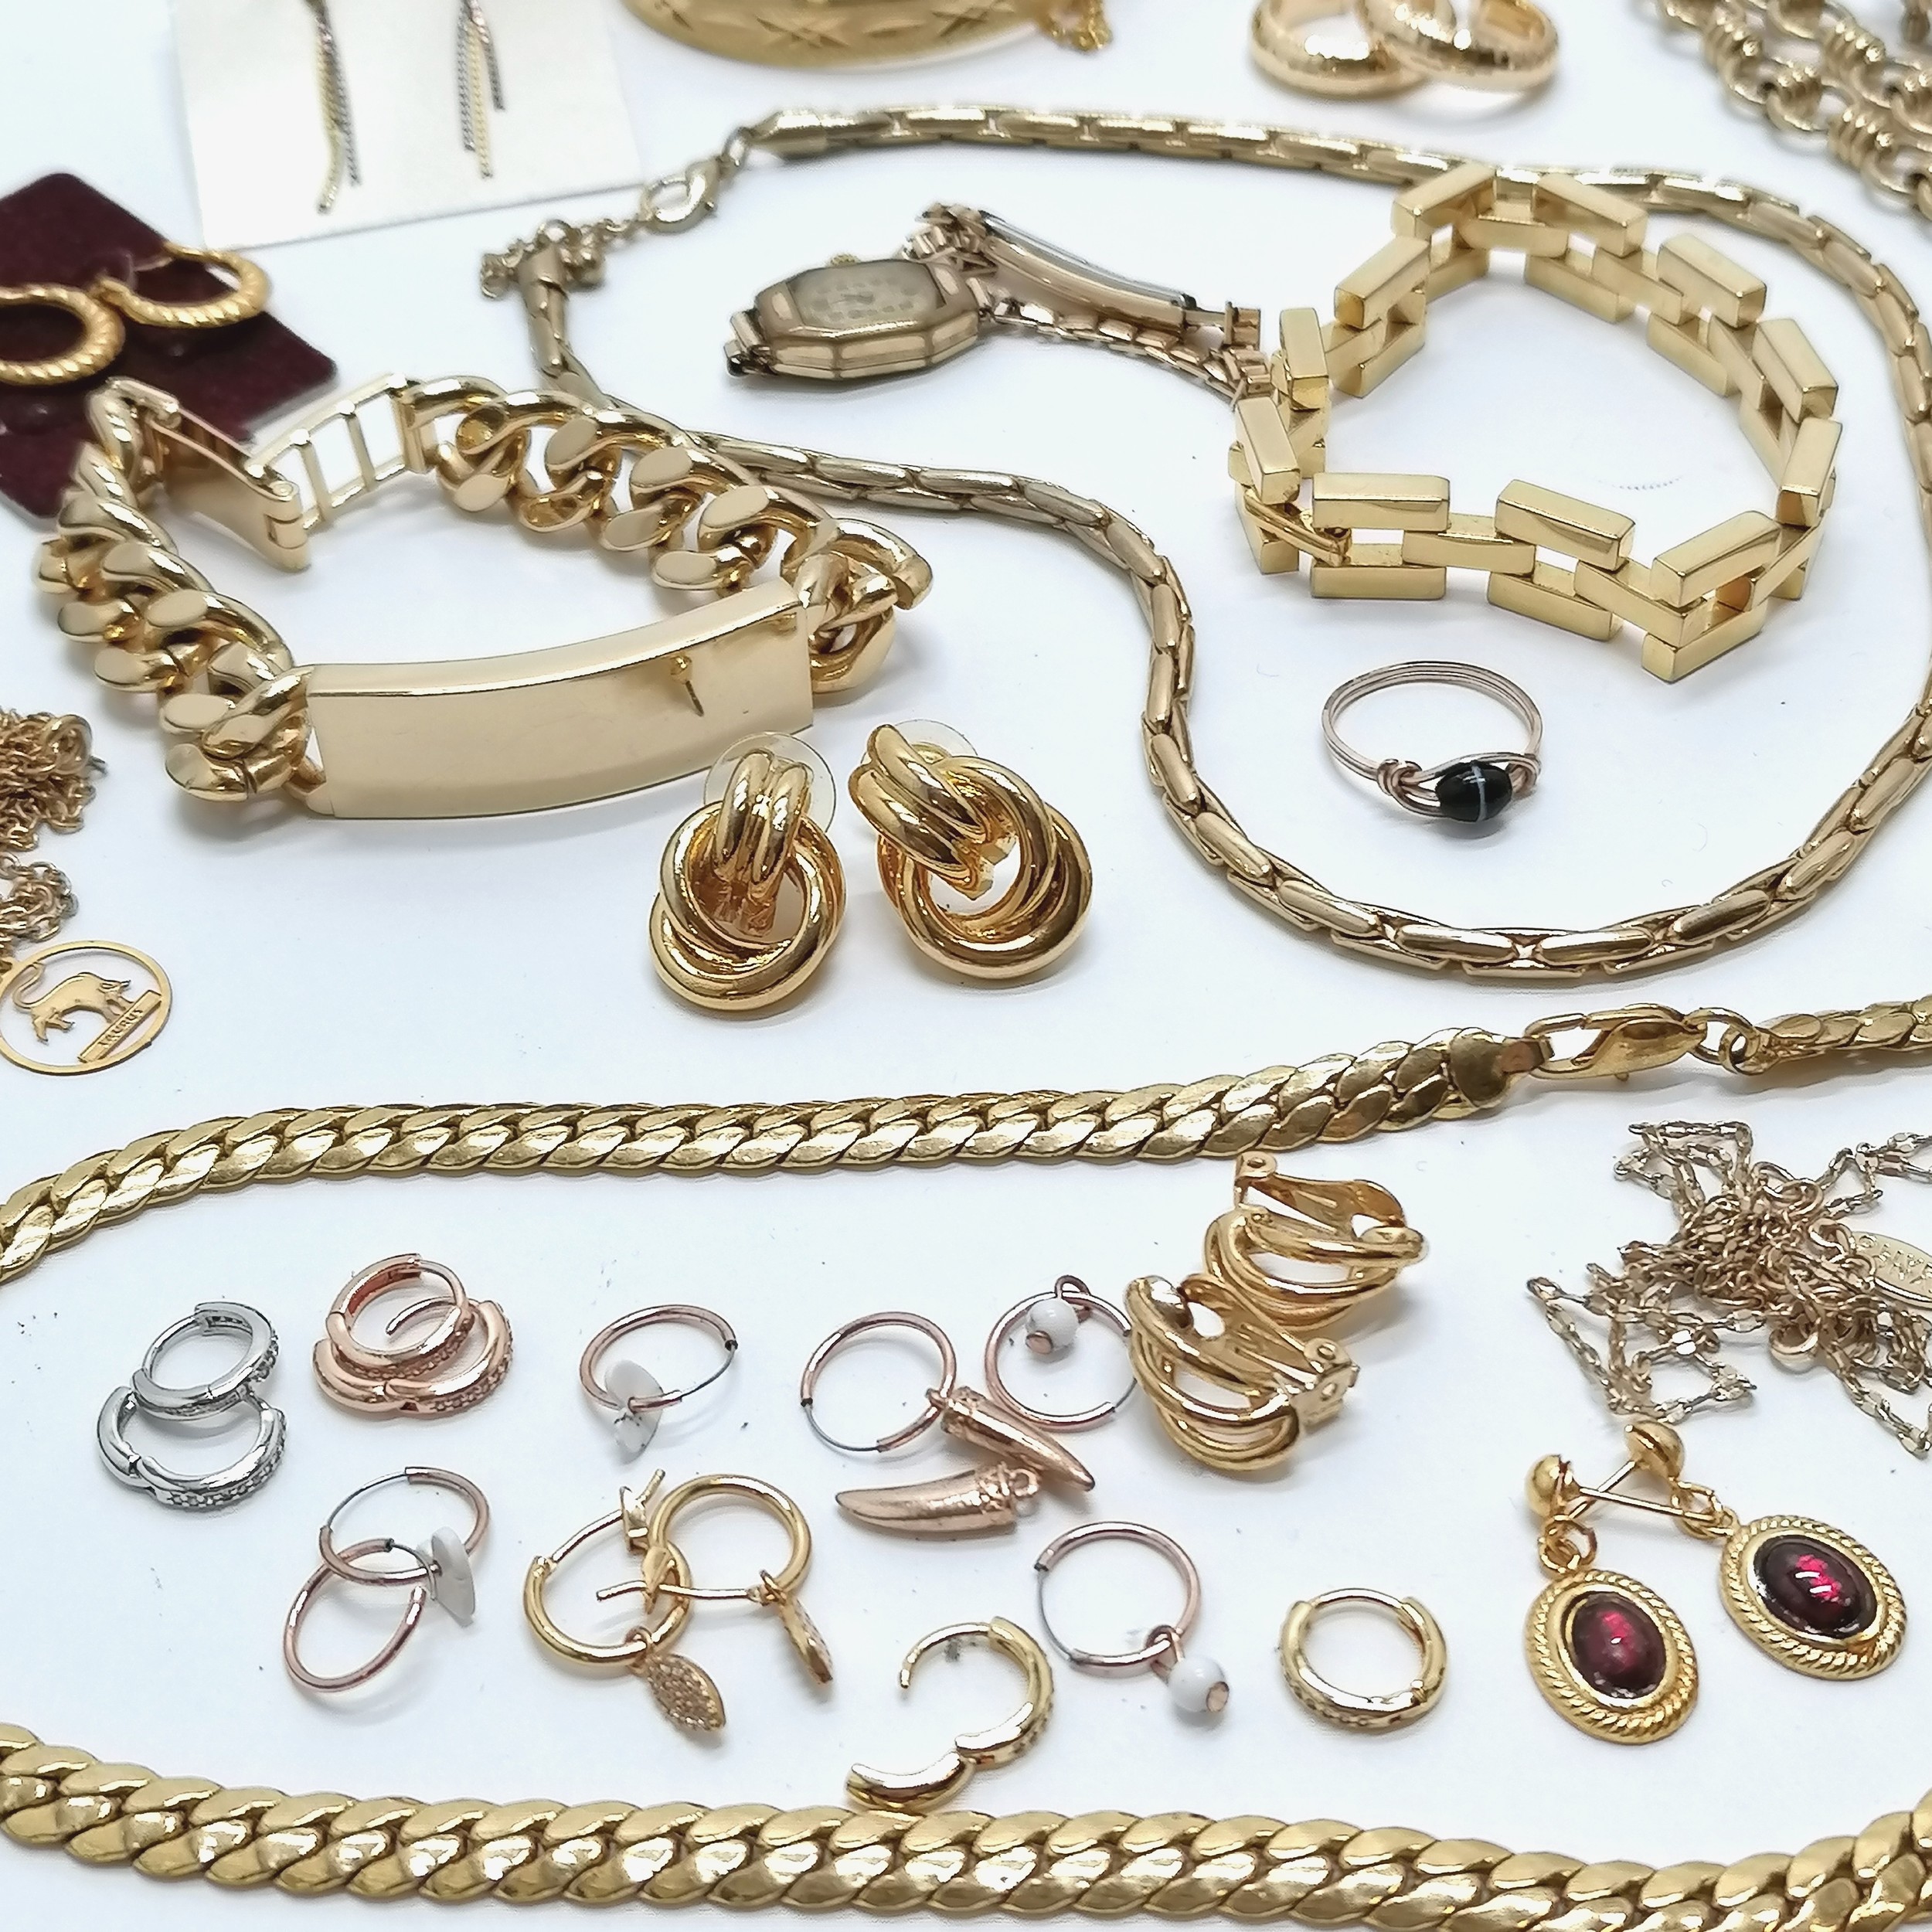 Qty of gold tone jewellery inc necklaces, earrings, bracelets etc - SOLD ON BEHALF OF THE NEW BREAST - Image 2 of 3